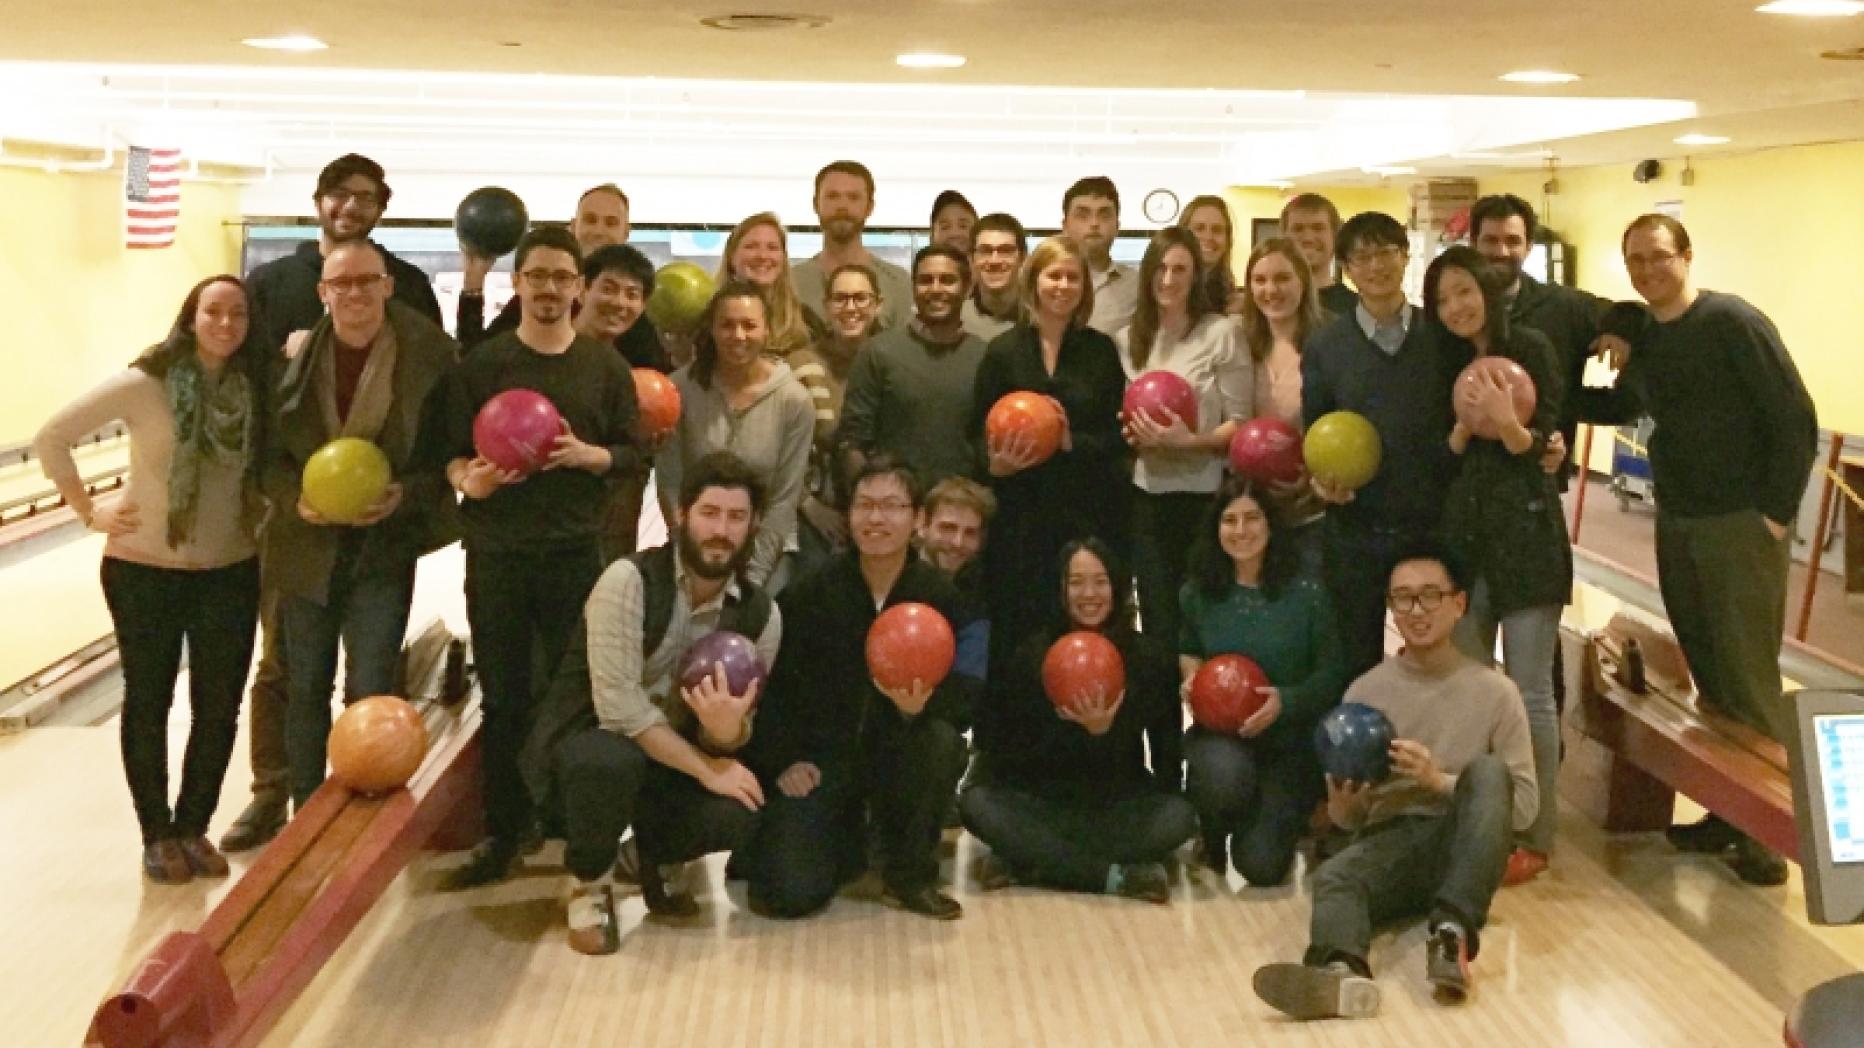 Group photo of students at a bowling alley